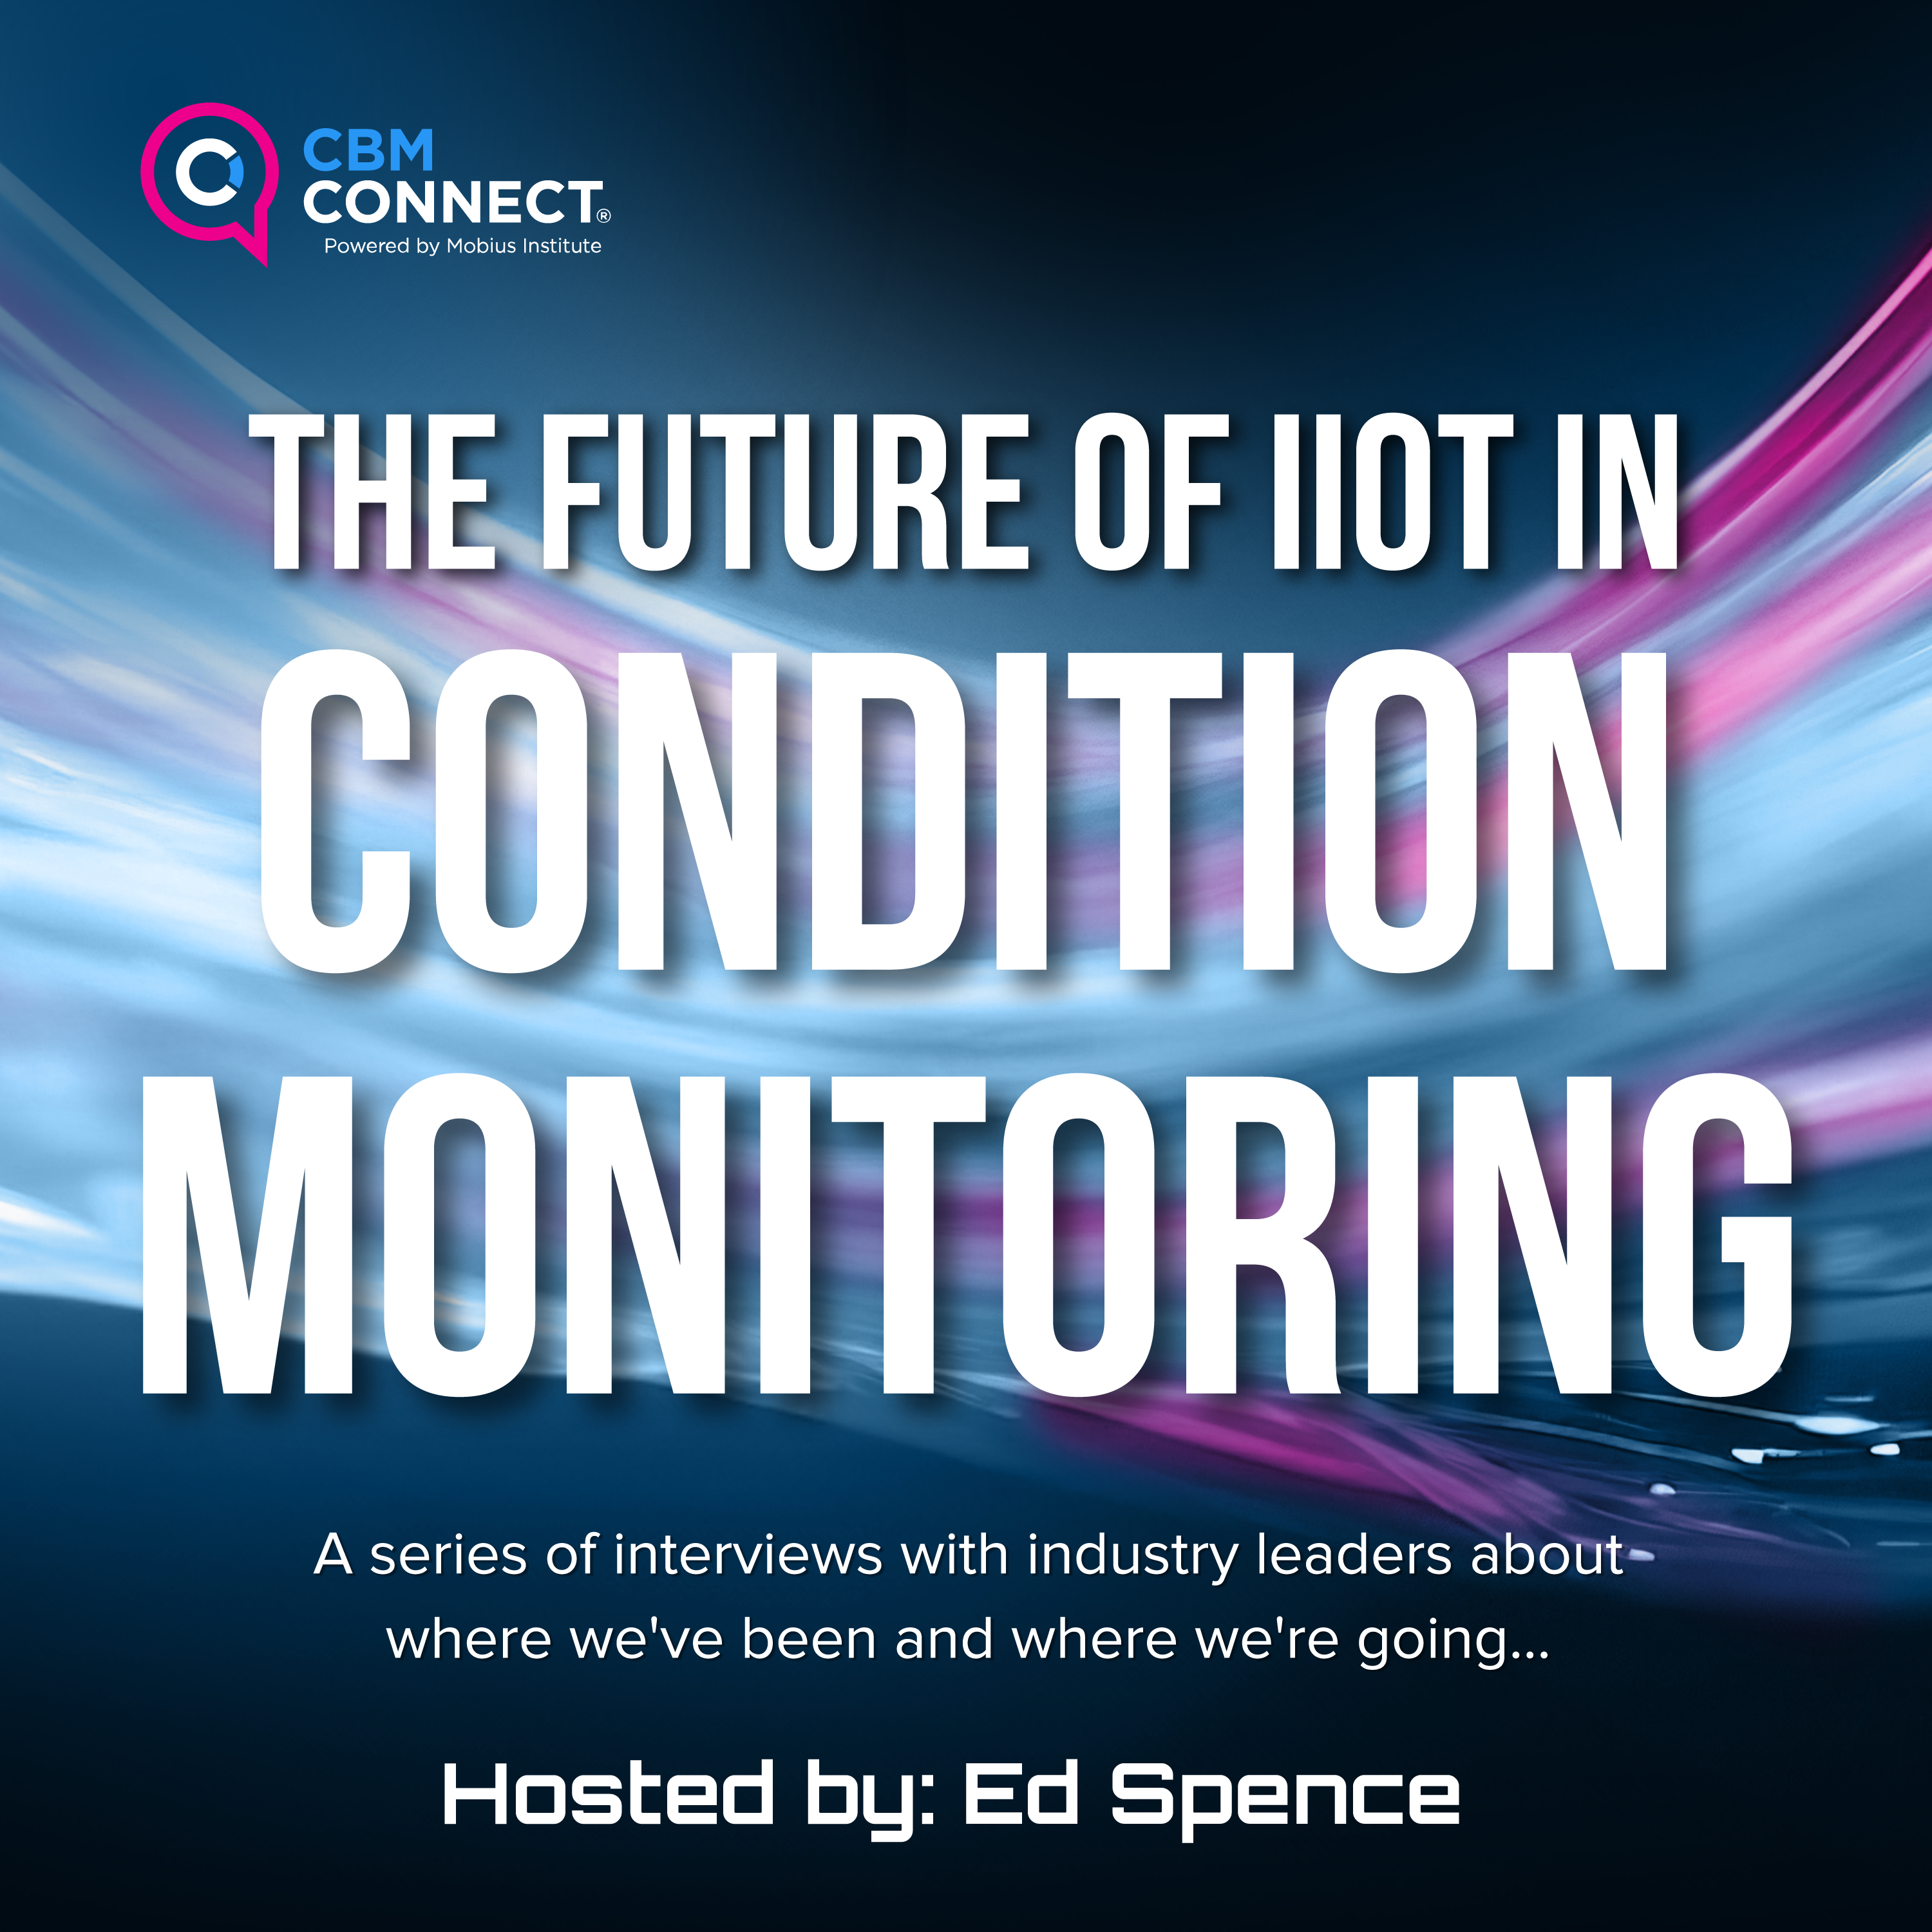 The Future of IIoT in Condition Monitoring